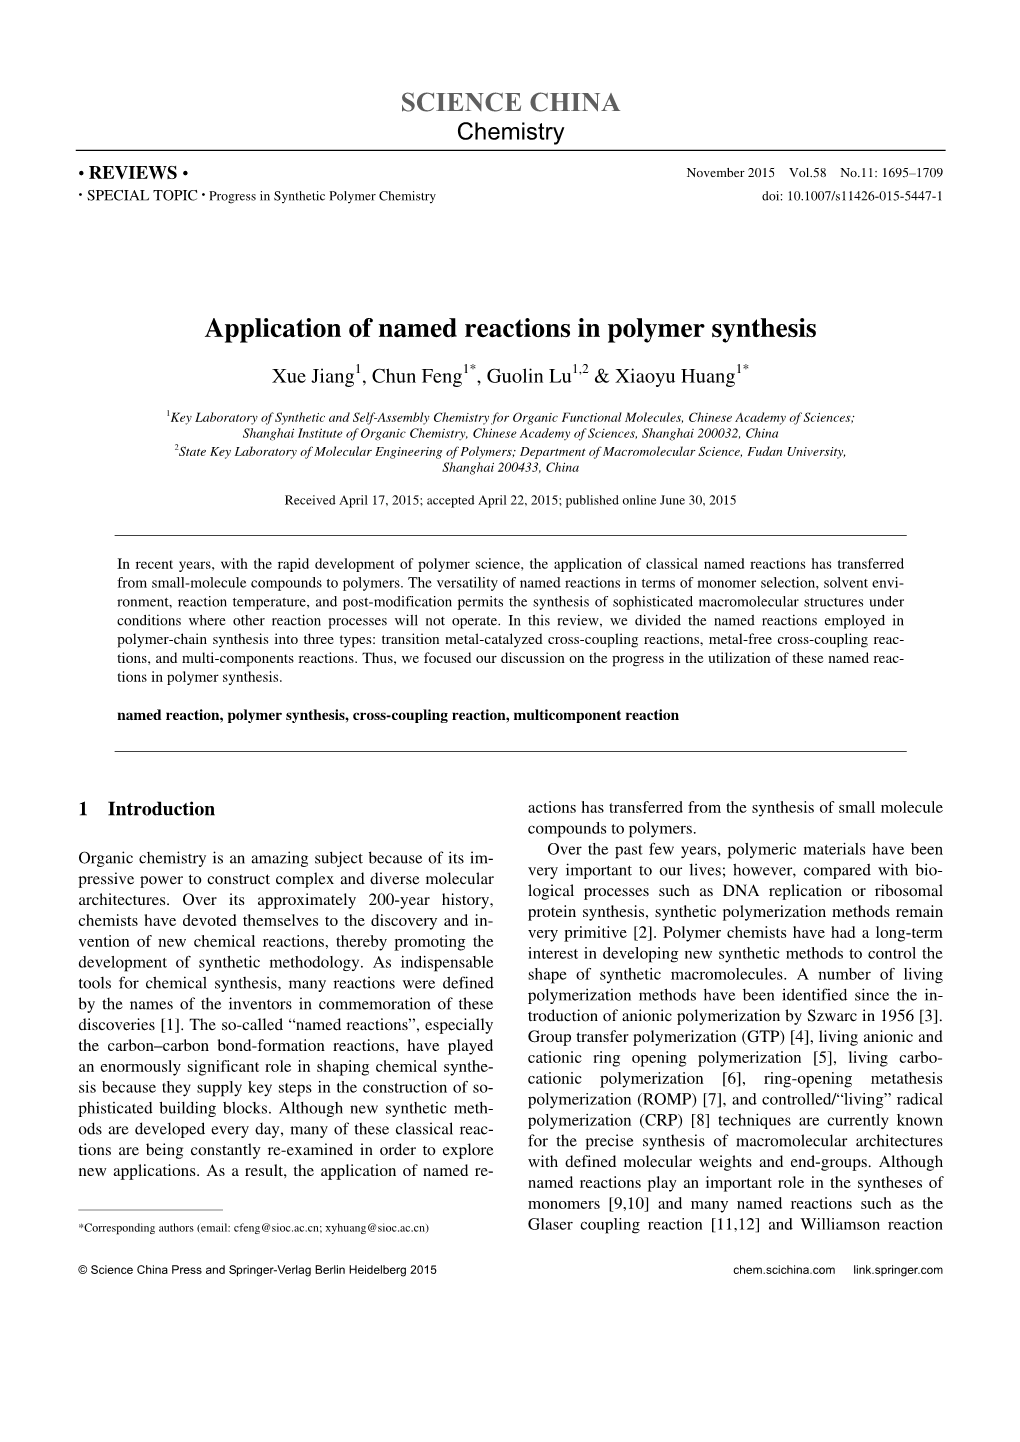 SCIENCE CHINA Application of Named Reactions in Polymer Synthesis